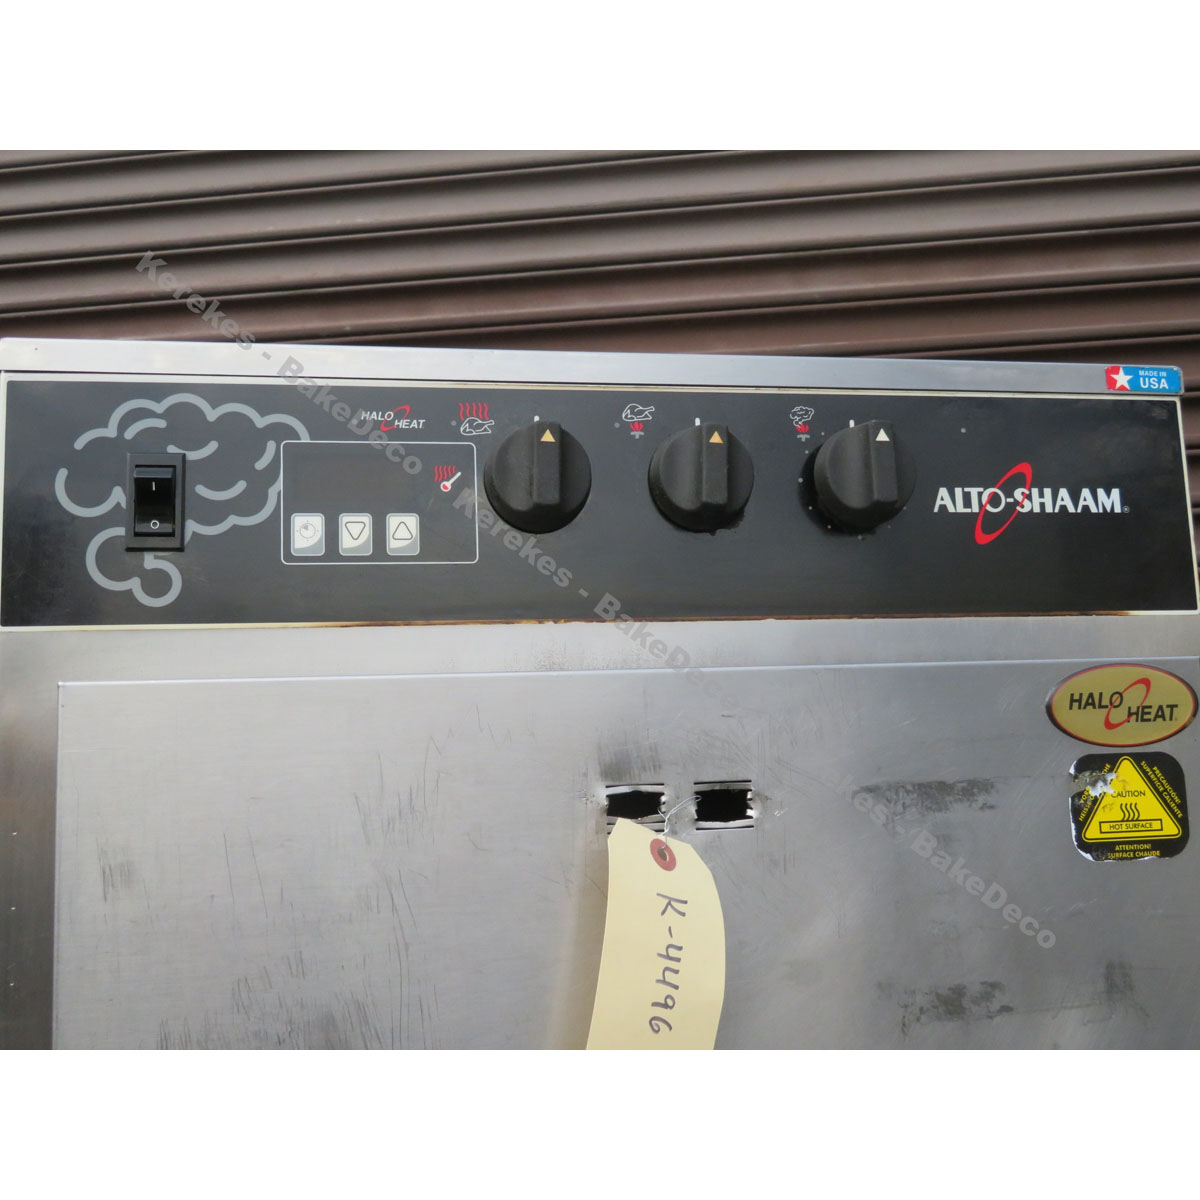 Alto Shaam 1000-SK/I Cook & Hold Smoker, Used Good Condition image 1